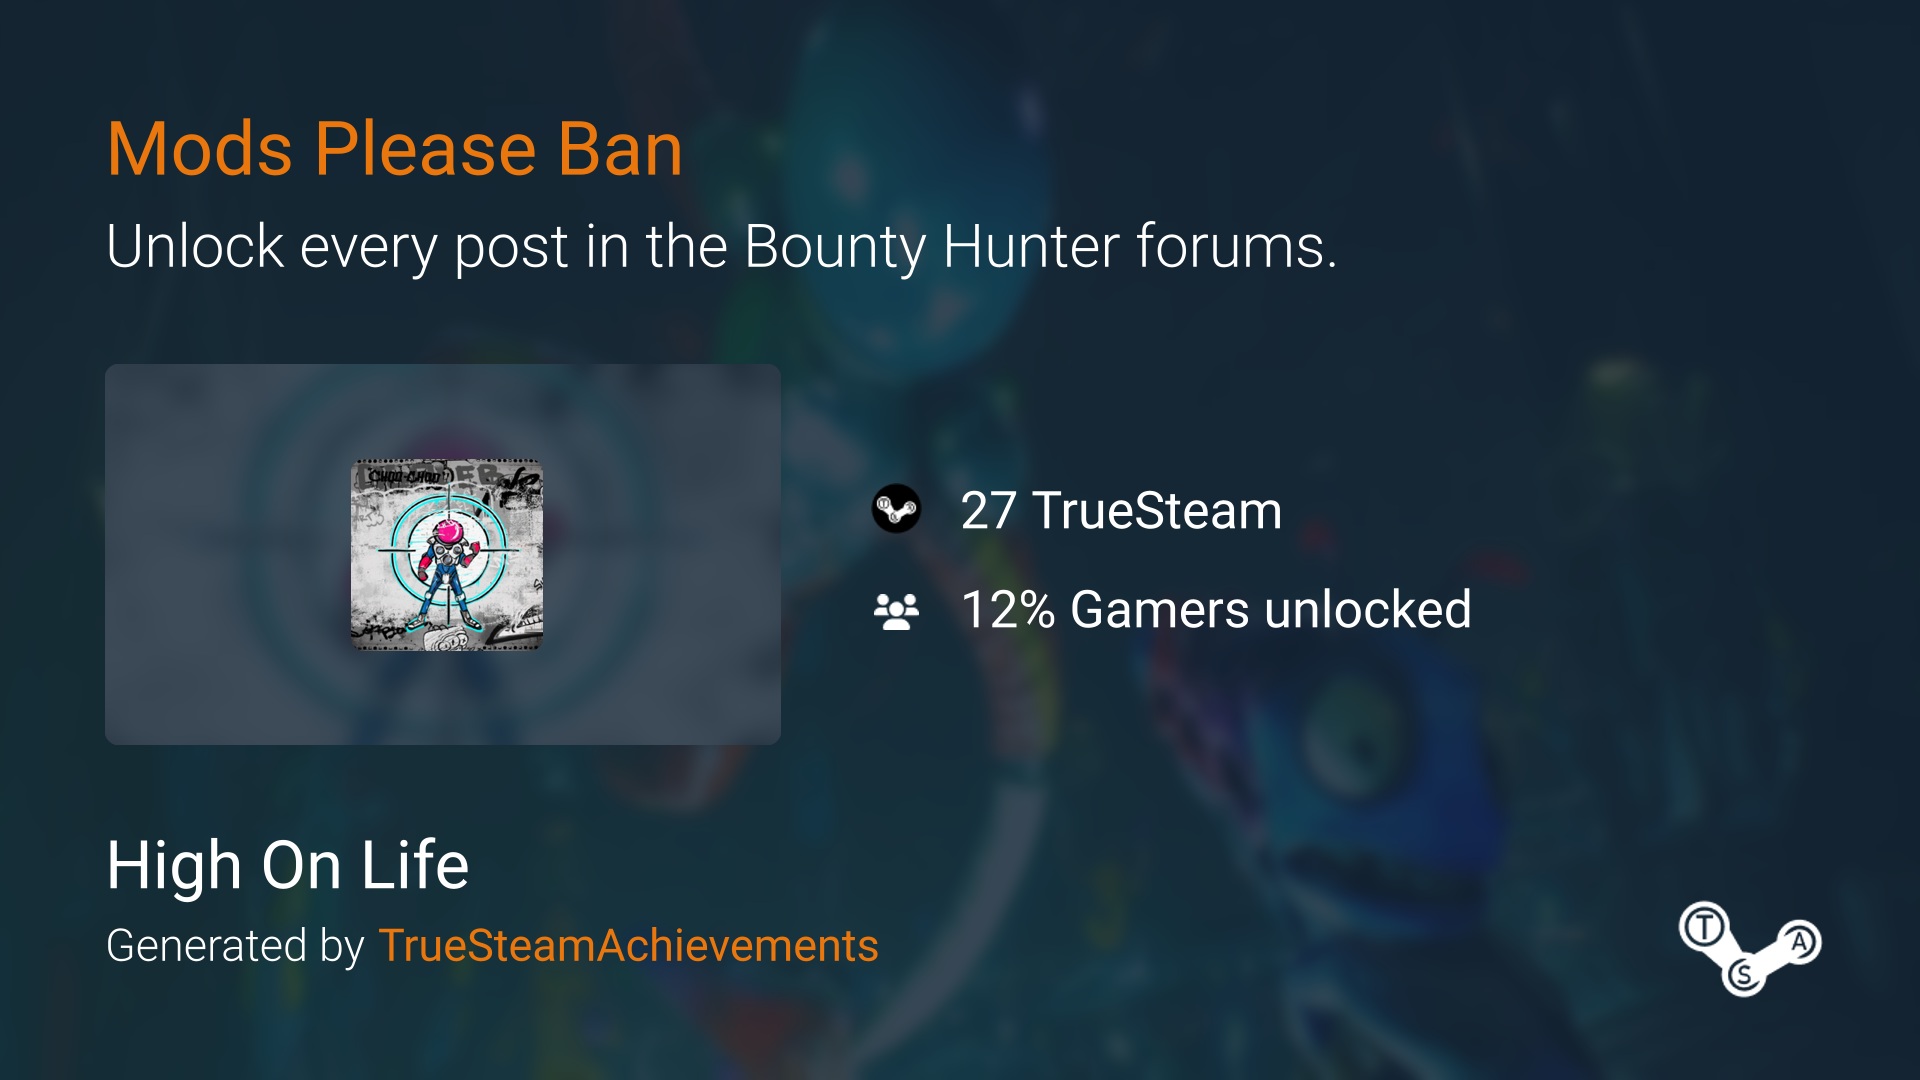 Mods Please Ban achievement in High On Life